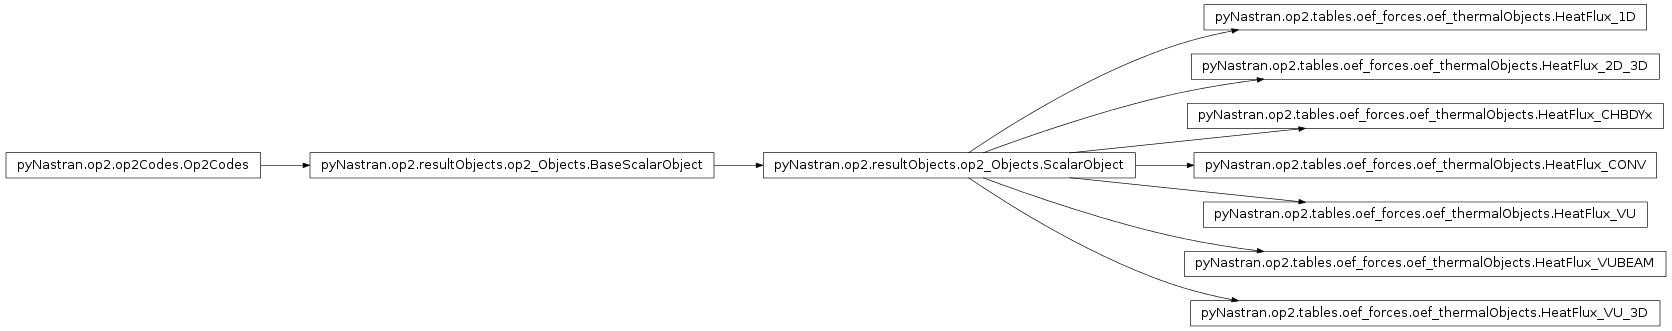 Inheritance diagram of pyNastran.op2.tables.oef_forces.oef_thermalObjects